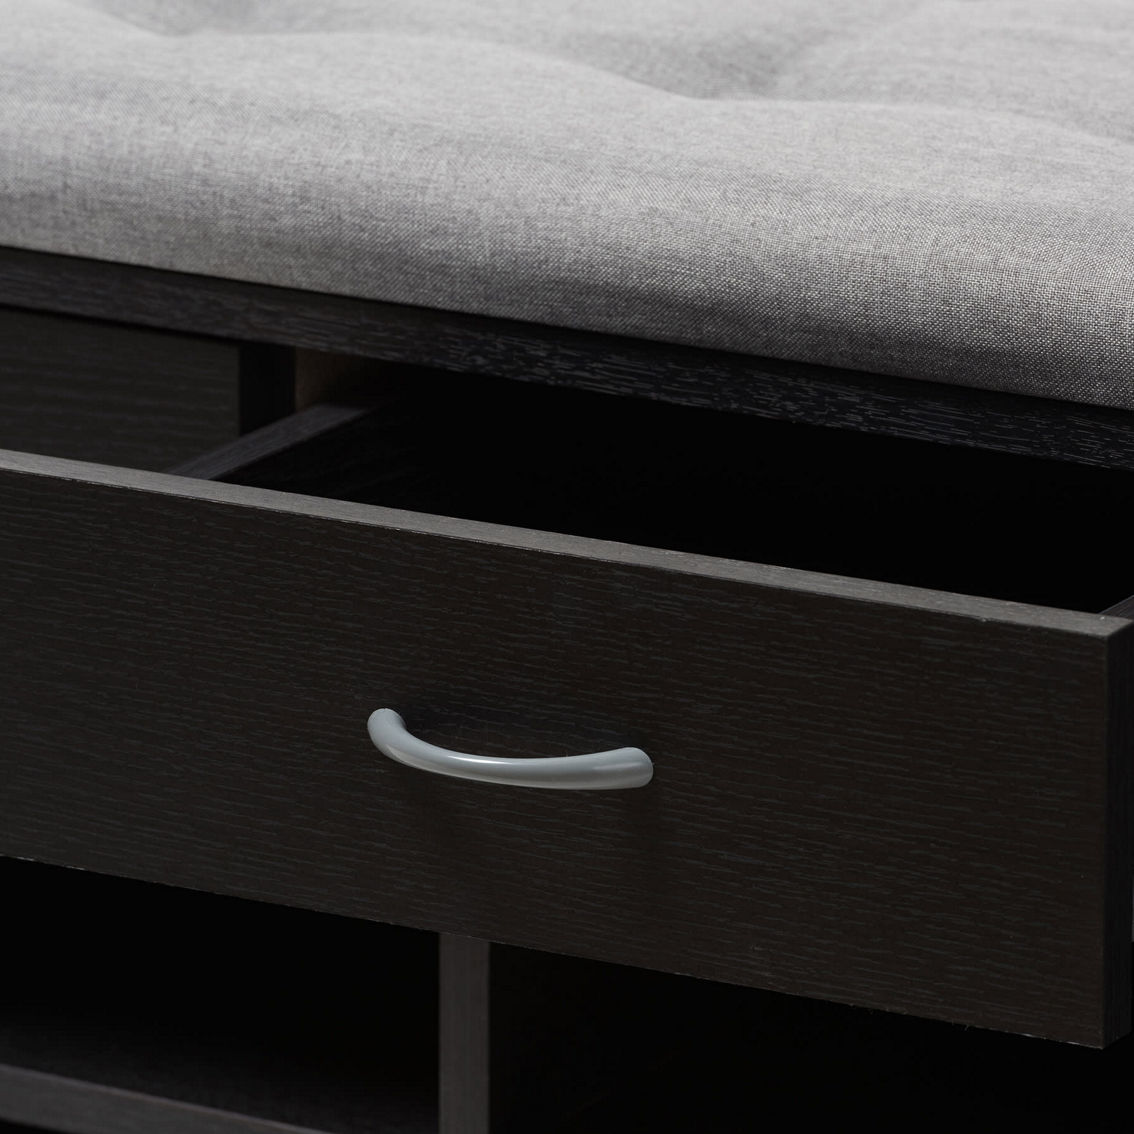 Baxton Studio Espresso Finished Grey Fabric Upholstered Cushioned Entryway Bench - Image 5 of 5